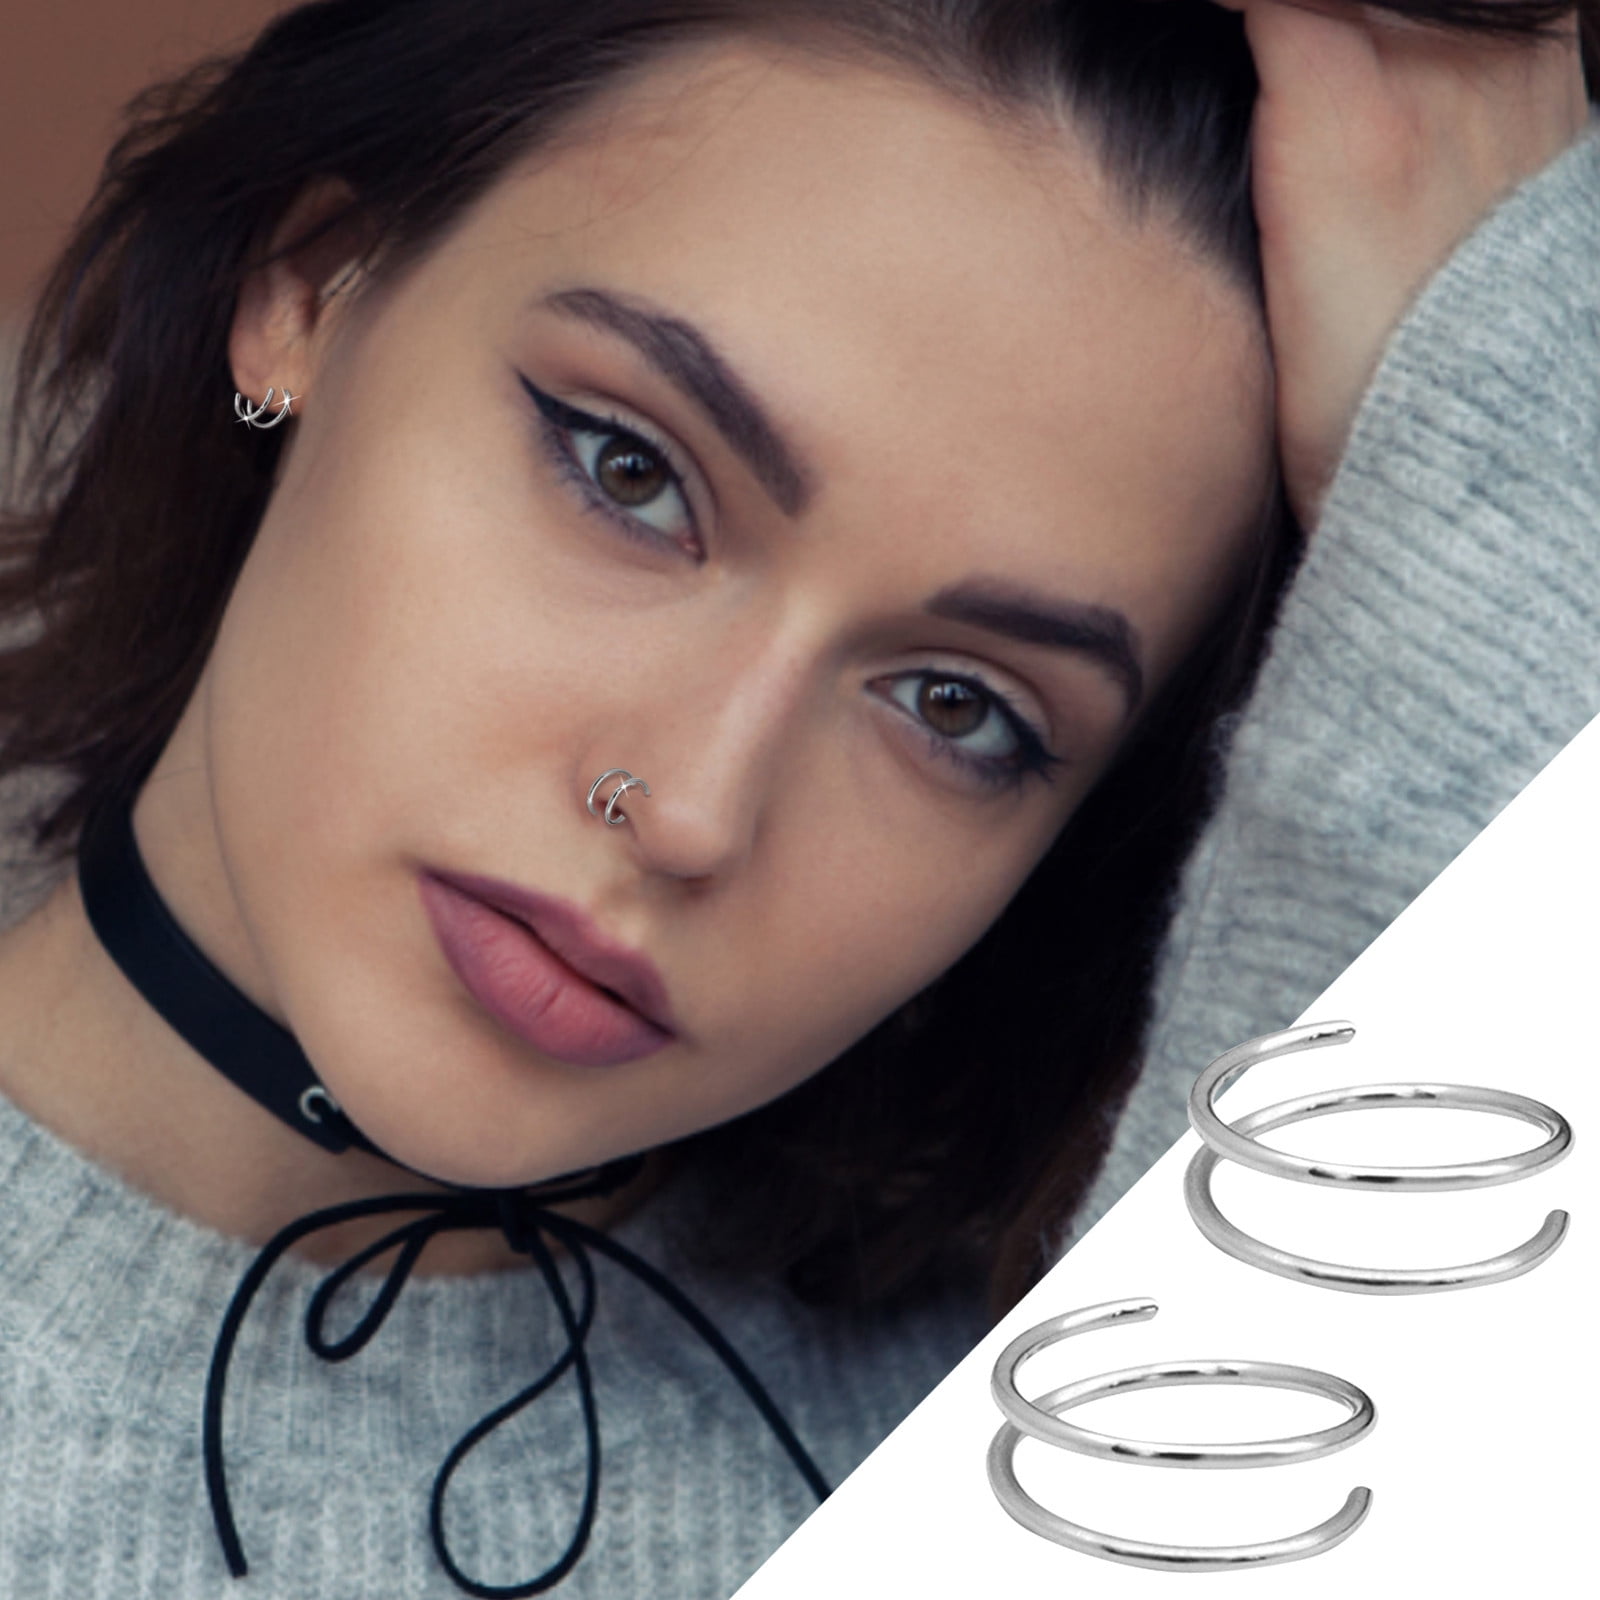 Double Hoop Nose Ring Spiral Nose Hoop 20 Gauge Thin Nose Piercings  Stainless Steel Body Jewelry 0.8mm*8mm6pcs | Fruugo BH